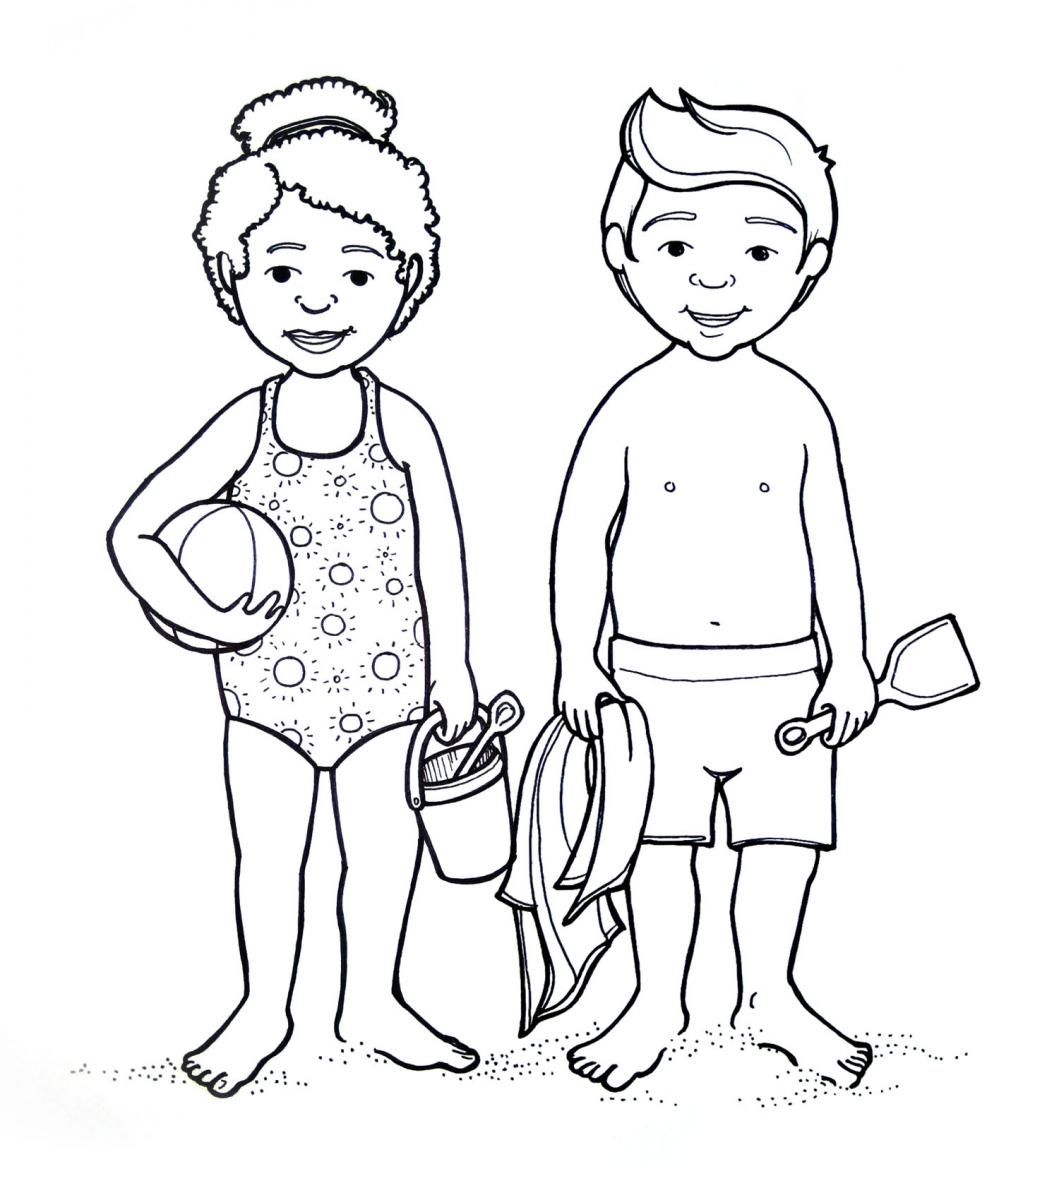 Body Parts Coloring Pages For Preschoolers - Coloring Pages For ...